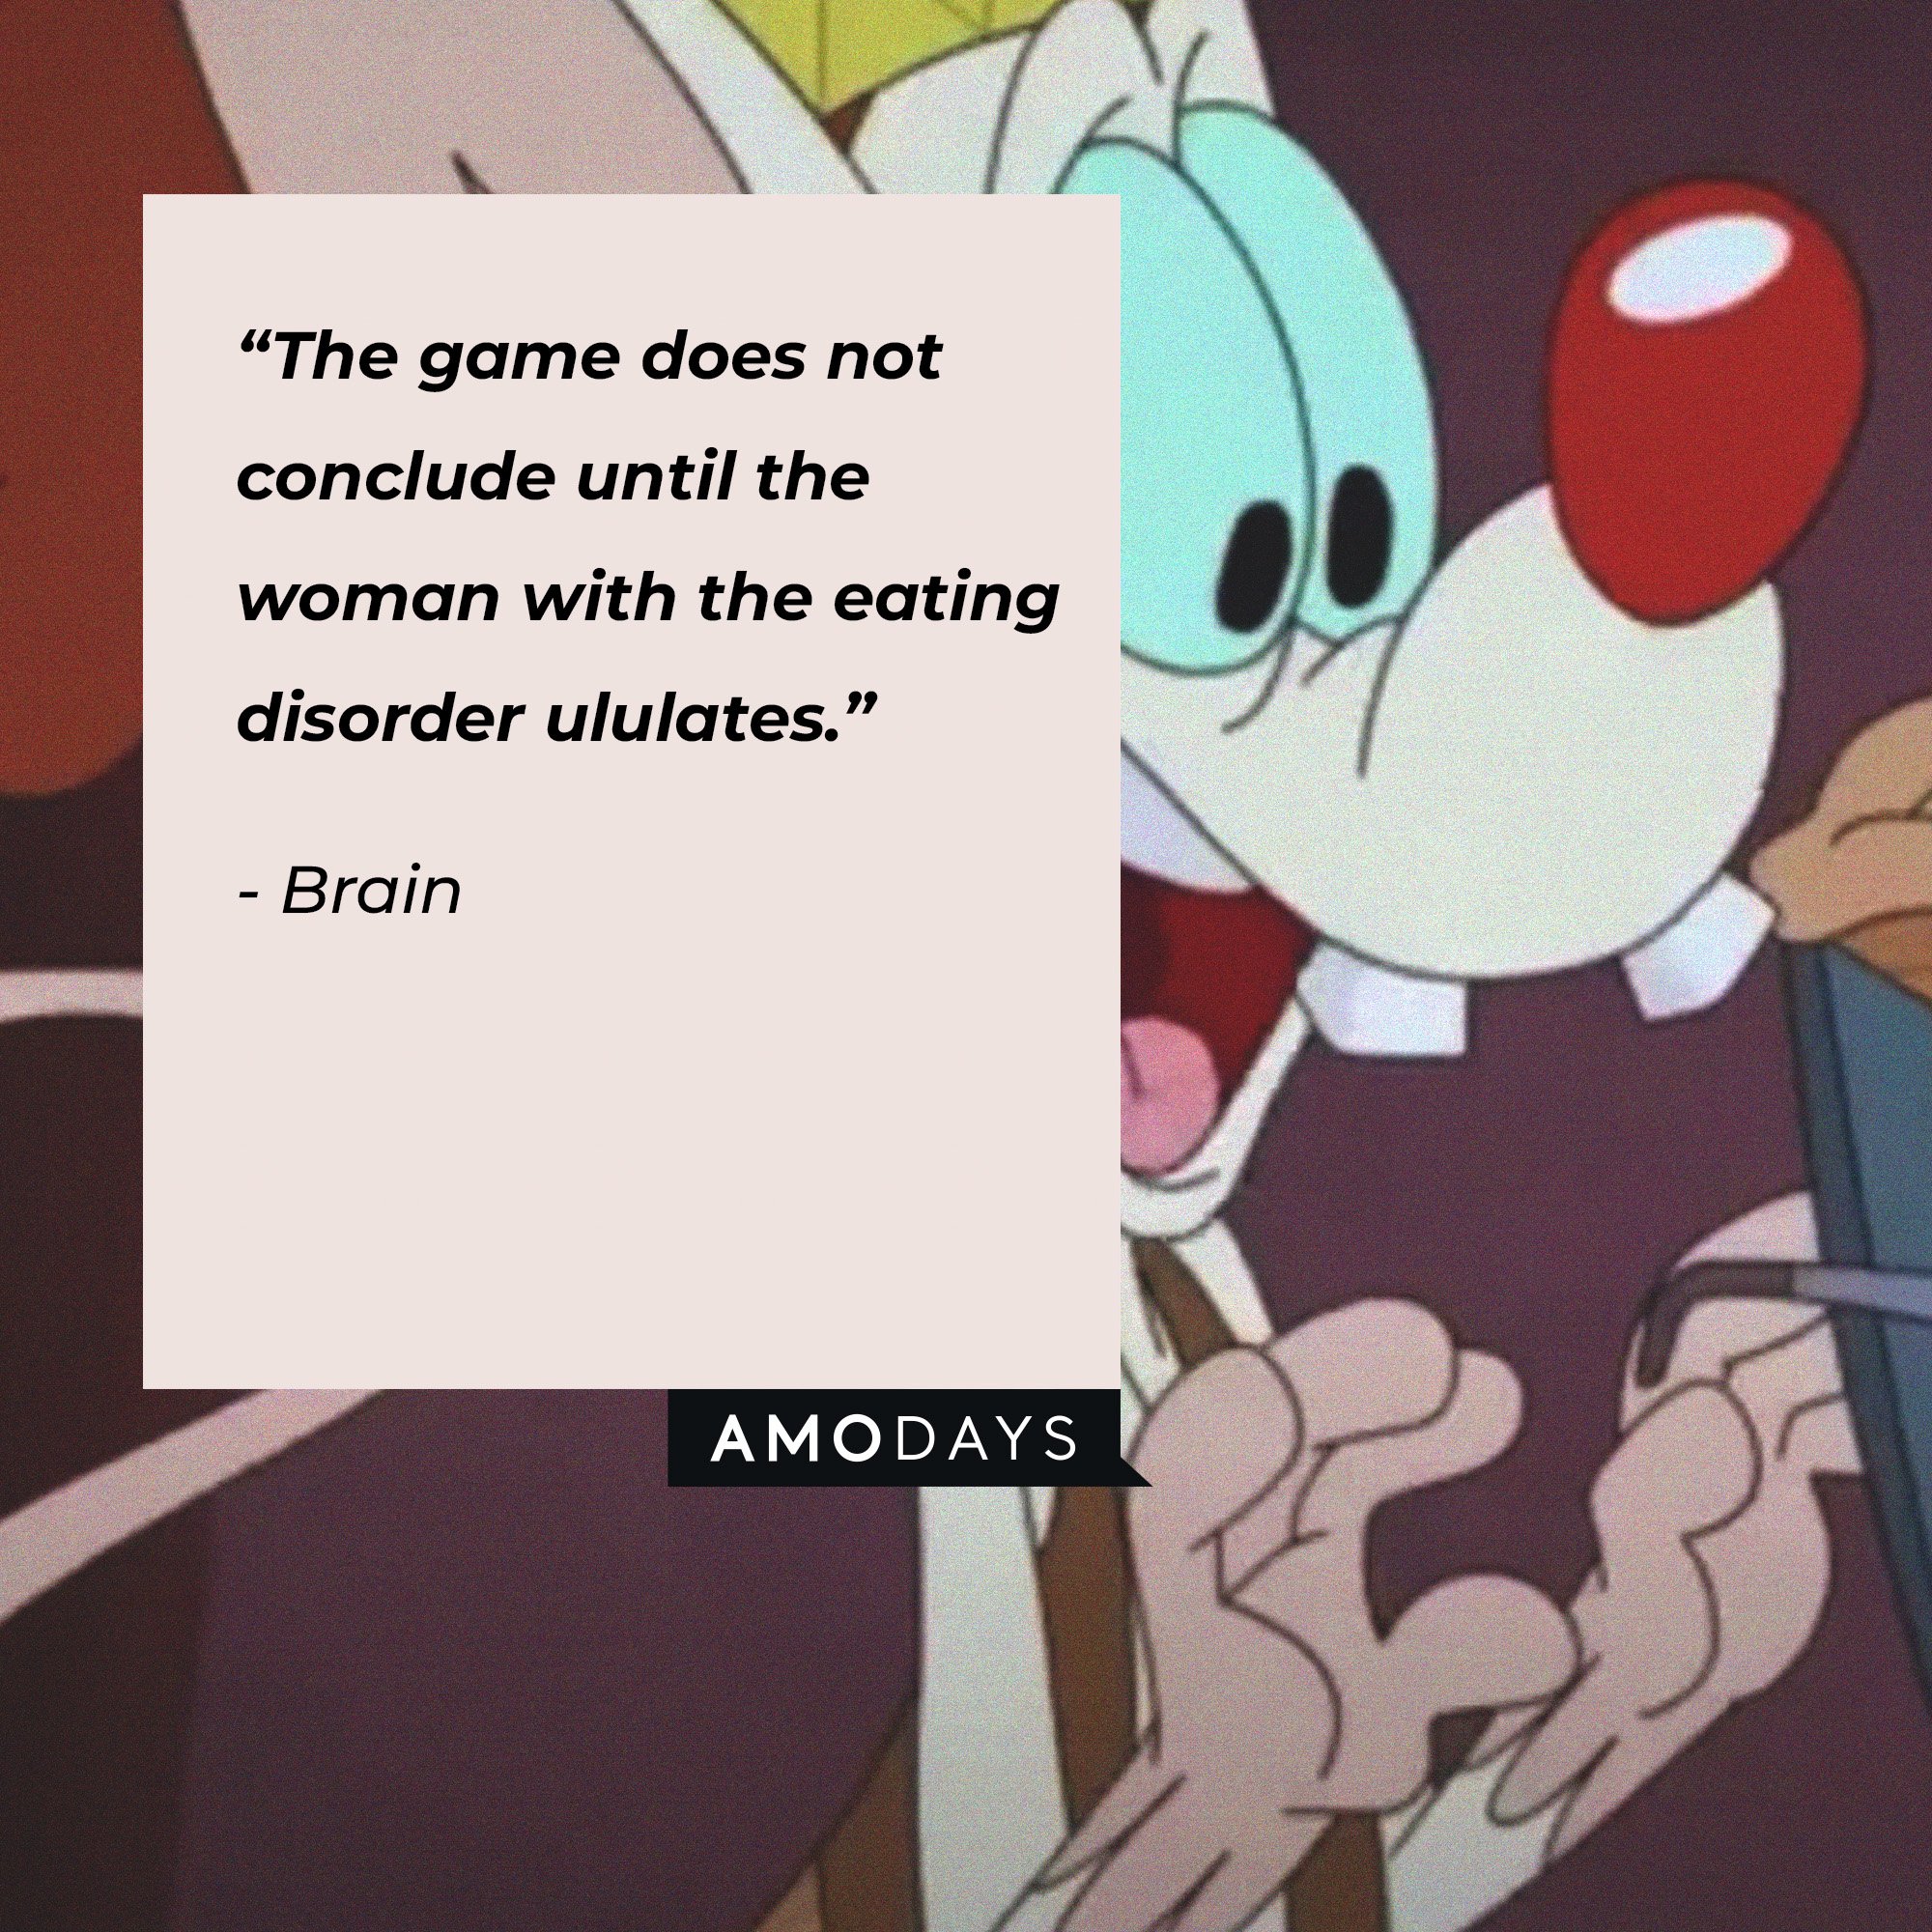  Brain's quote: “The game does not conclude until the woman with the eating disorder ululates.” | Image: AmoDays